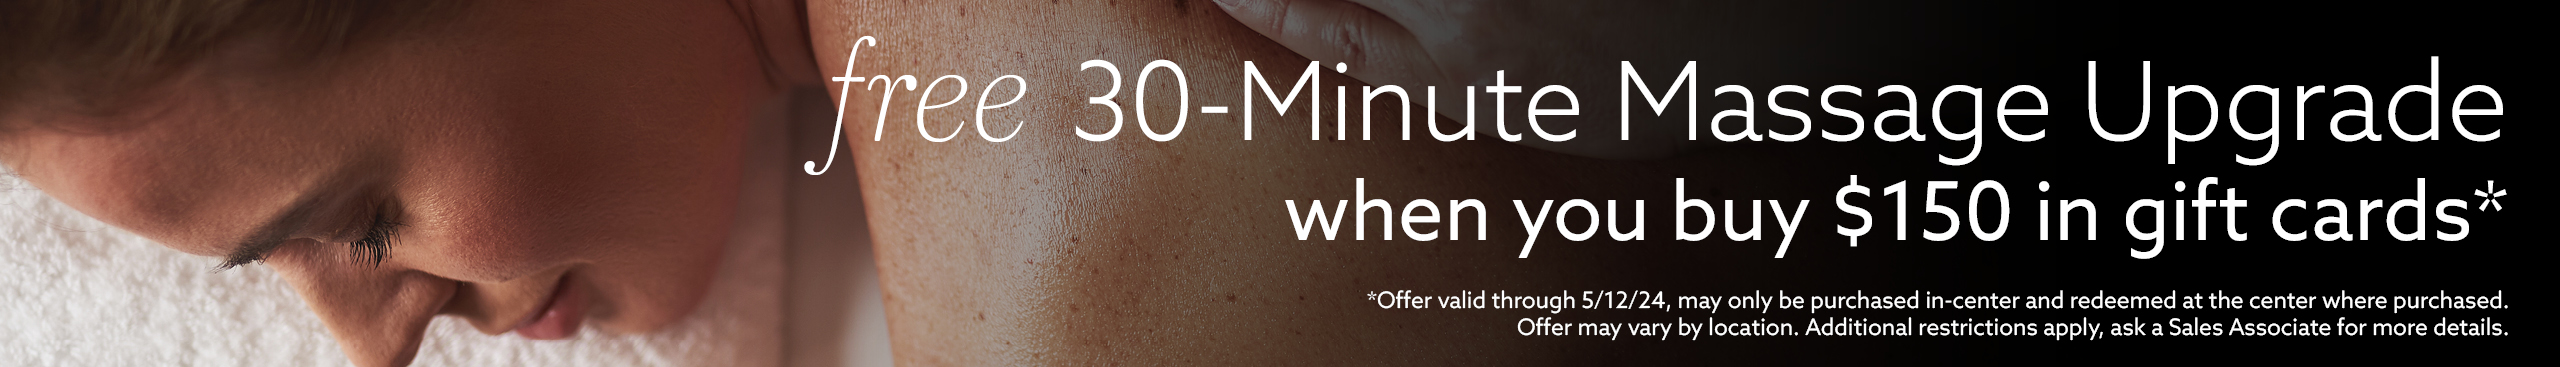 Free 30-minute massage upgrade with $150 in gift card purchases